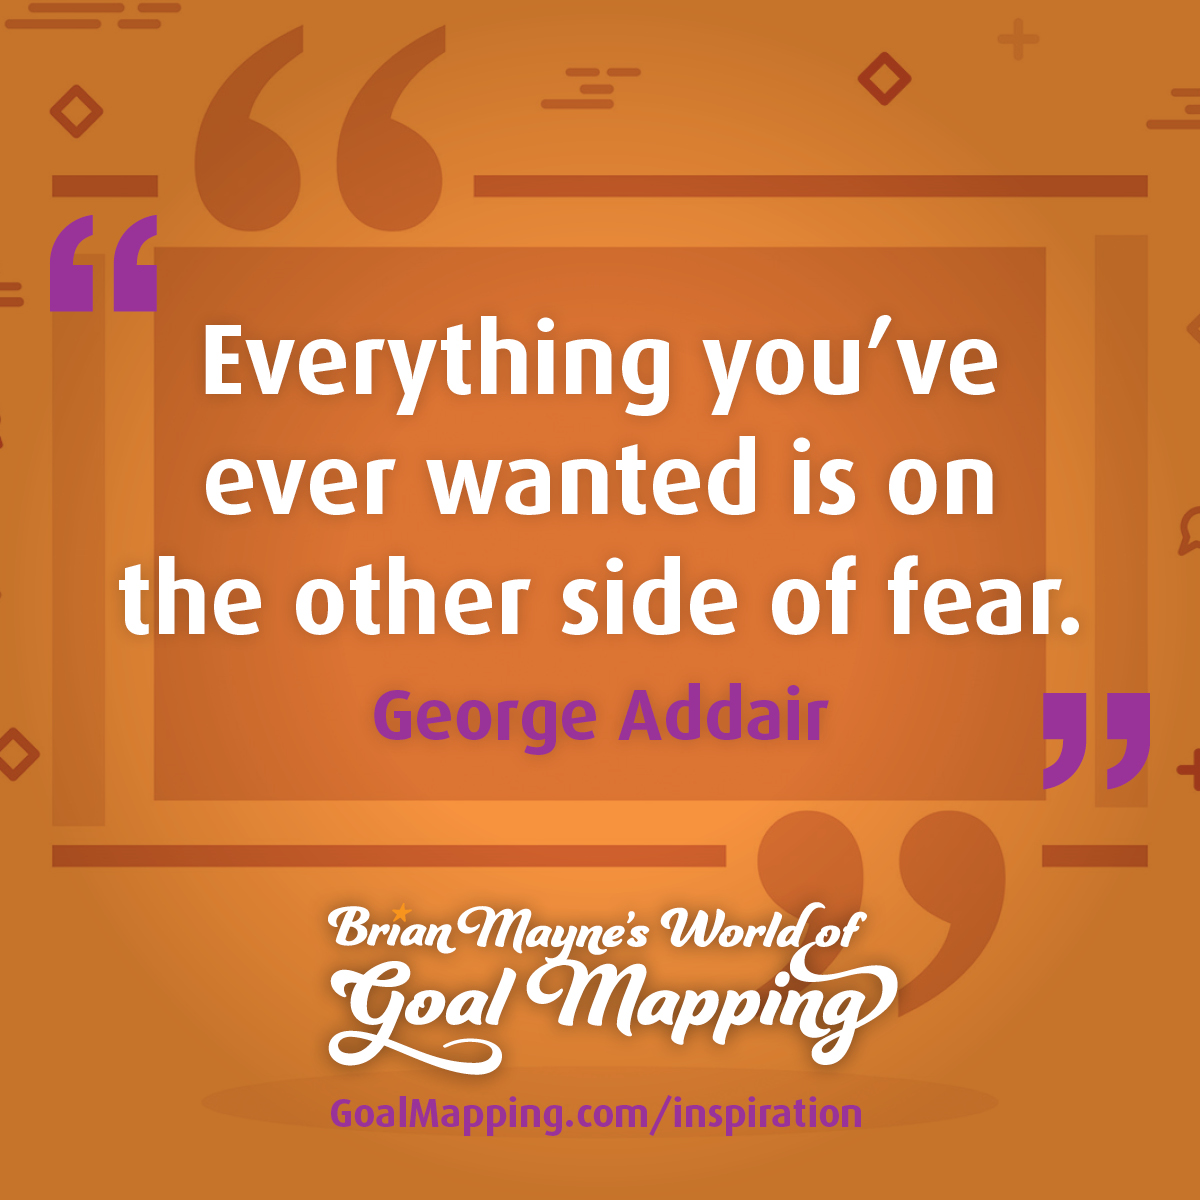 "Everything you’ve ever wanted is on the other side of fear." George Addair